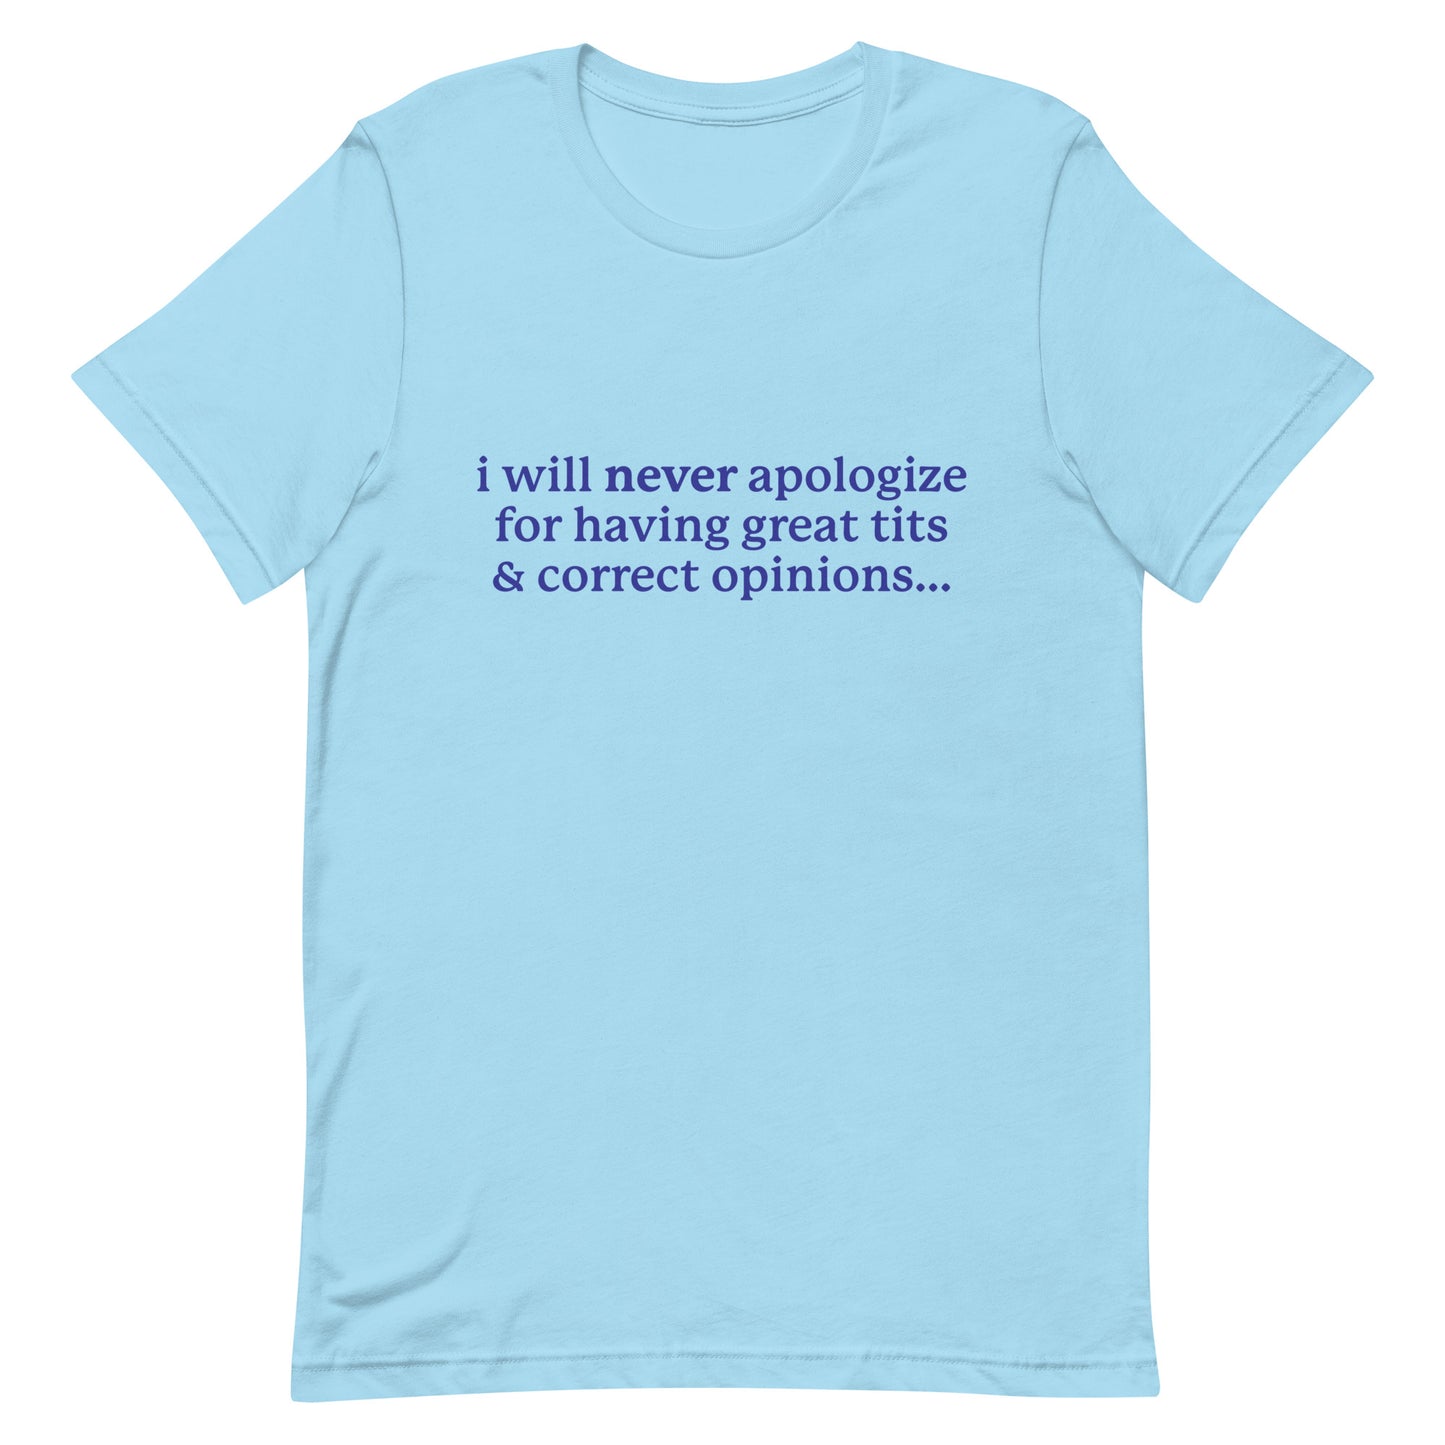 I Will Never Apologize (Great Tits & Correct Opinions) Unisex t-shirt